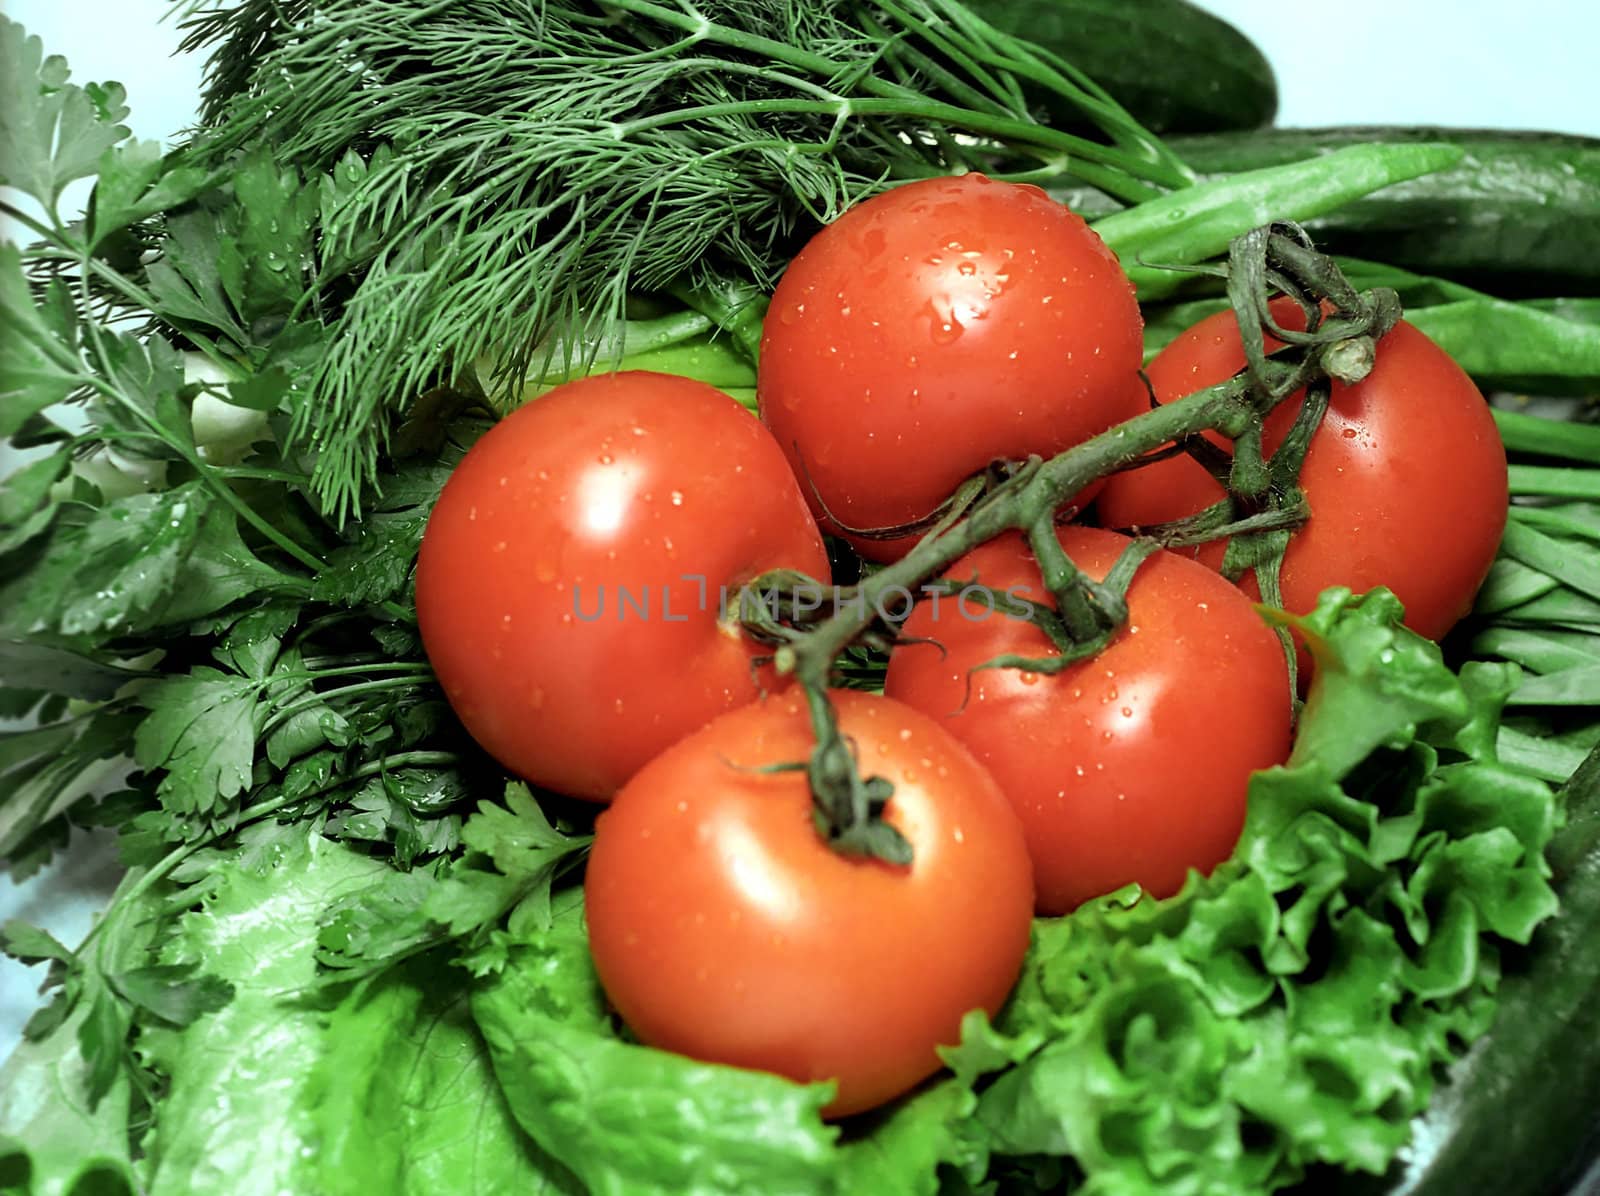 Red tomatoes on greenery background by mulden